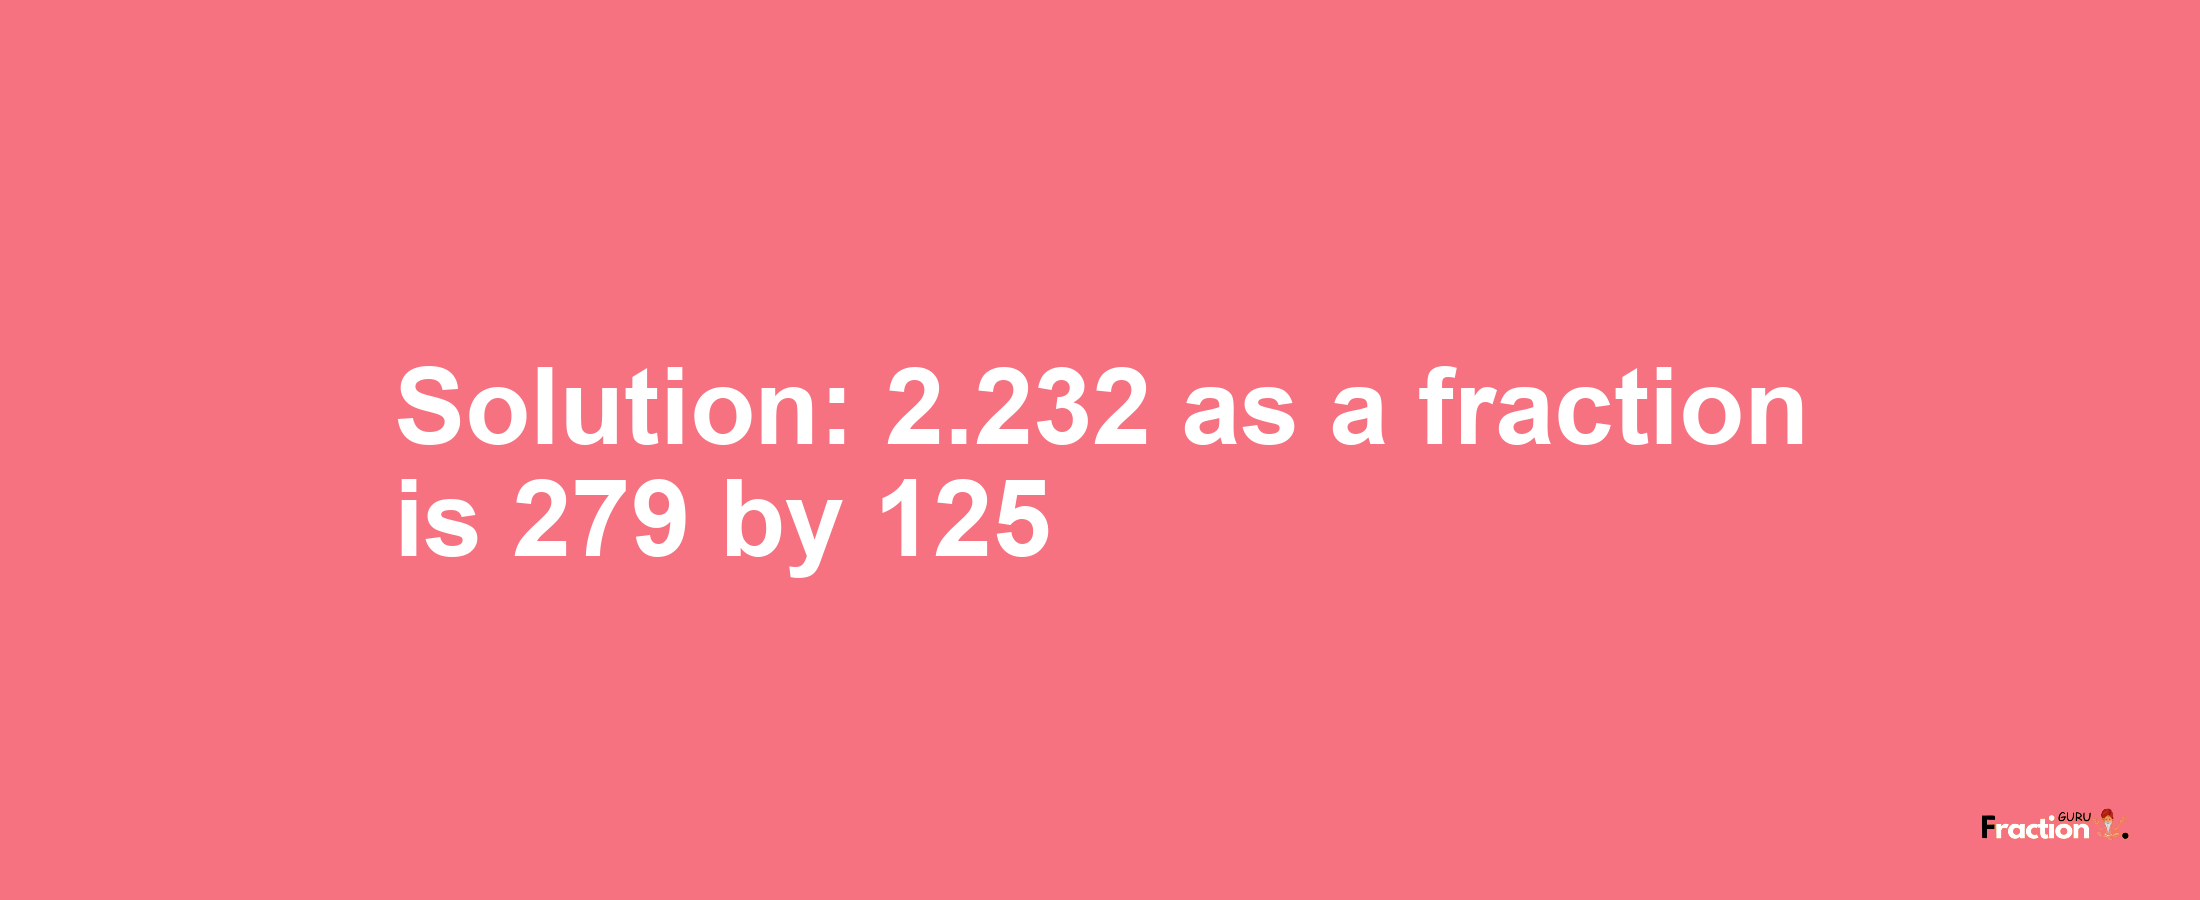 Solution:2.232 as a fraction is 279/125